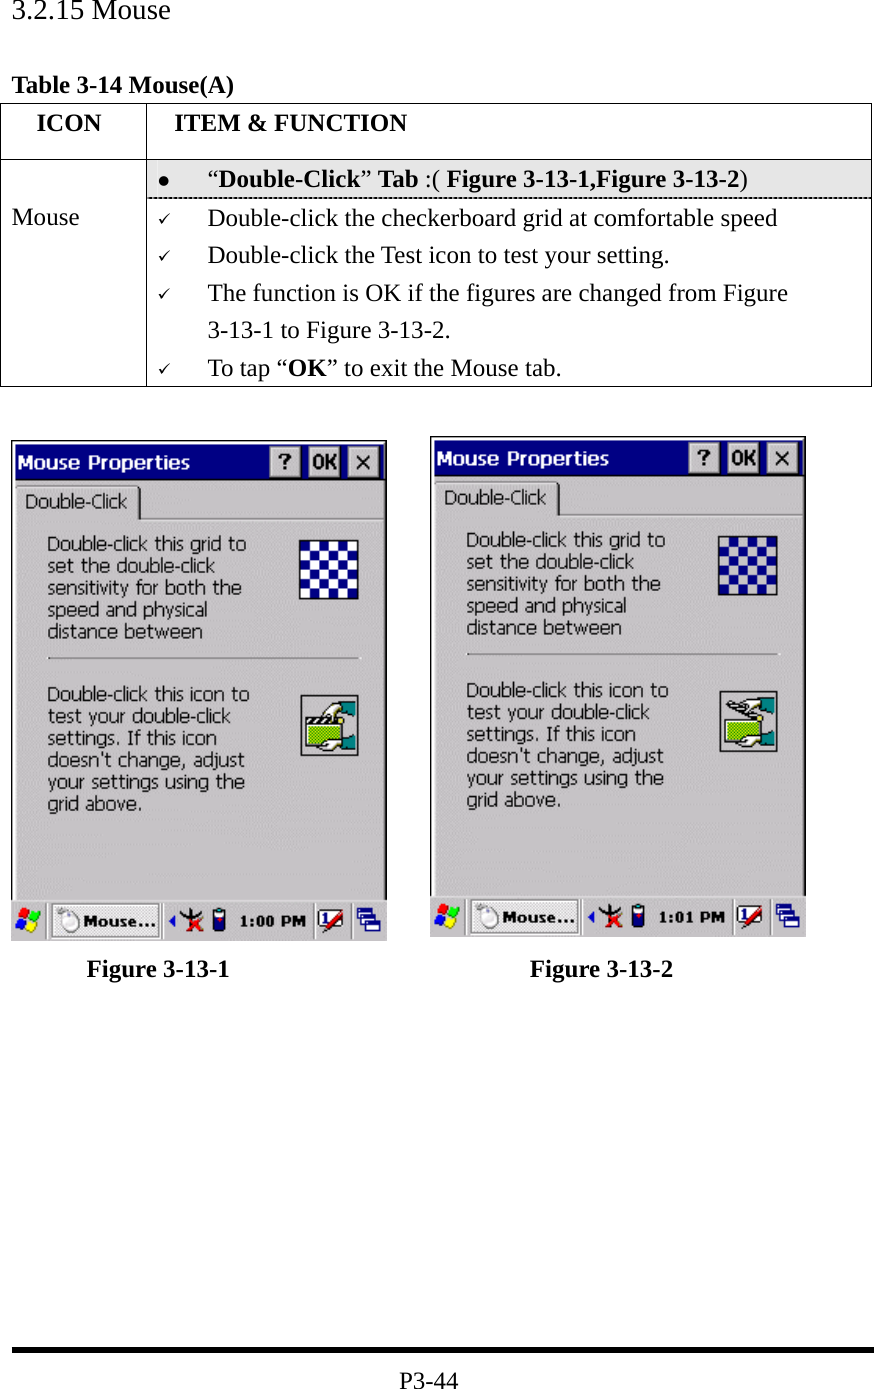  3.2.15 Mouse  Table 3-14 Mouse(A)   ICON   ITEM &amp; FUNCTION   “Double-Click” Tab :( Figure 3-13-1,Figure 3-13-2)    Mouse    Double-click the checkerboard grid at comfortable speed   Double-click the Test icon to test your setting.   The function is OK if the figures are changed from Figure 3-13-1 to Figure 3-13-2.   To tap “OK” to exit the Mouse tab.            Figure 3-13-1                        Figure 3-13-2           P3-44 